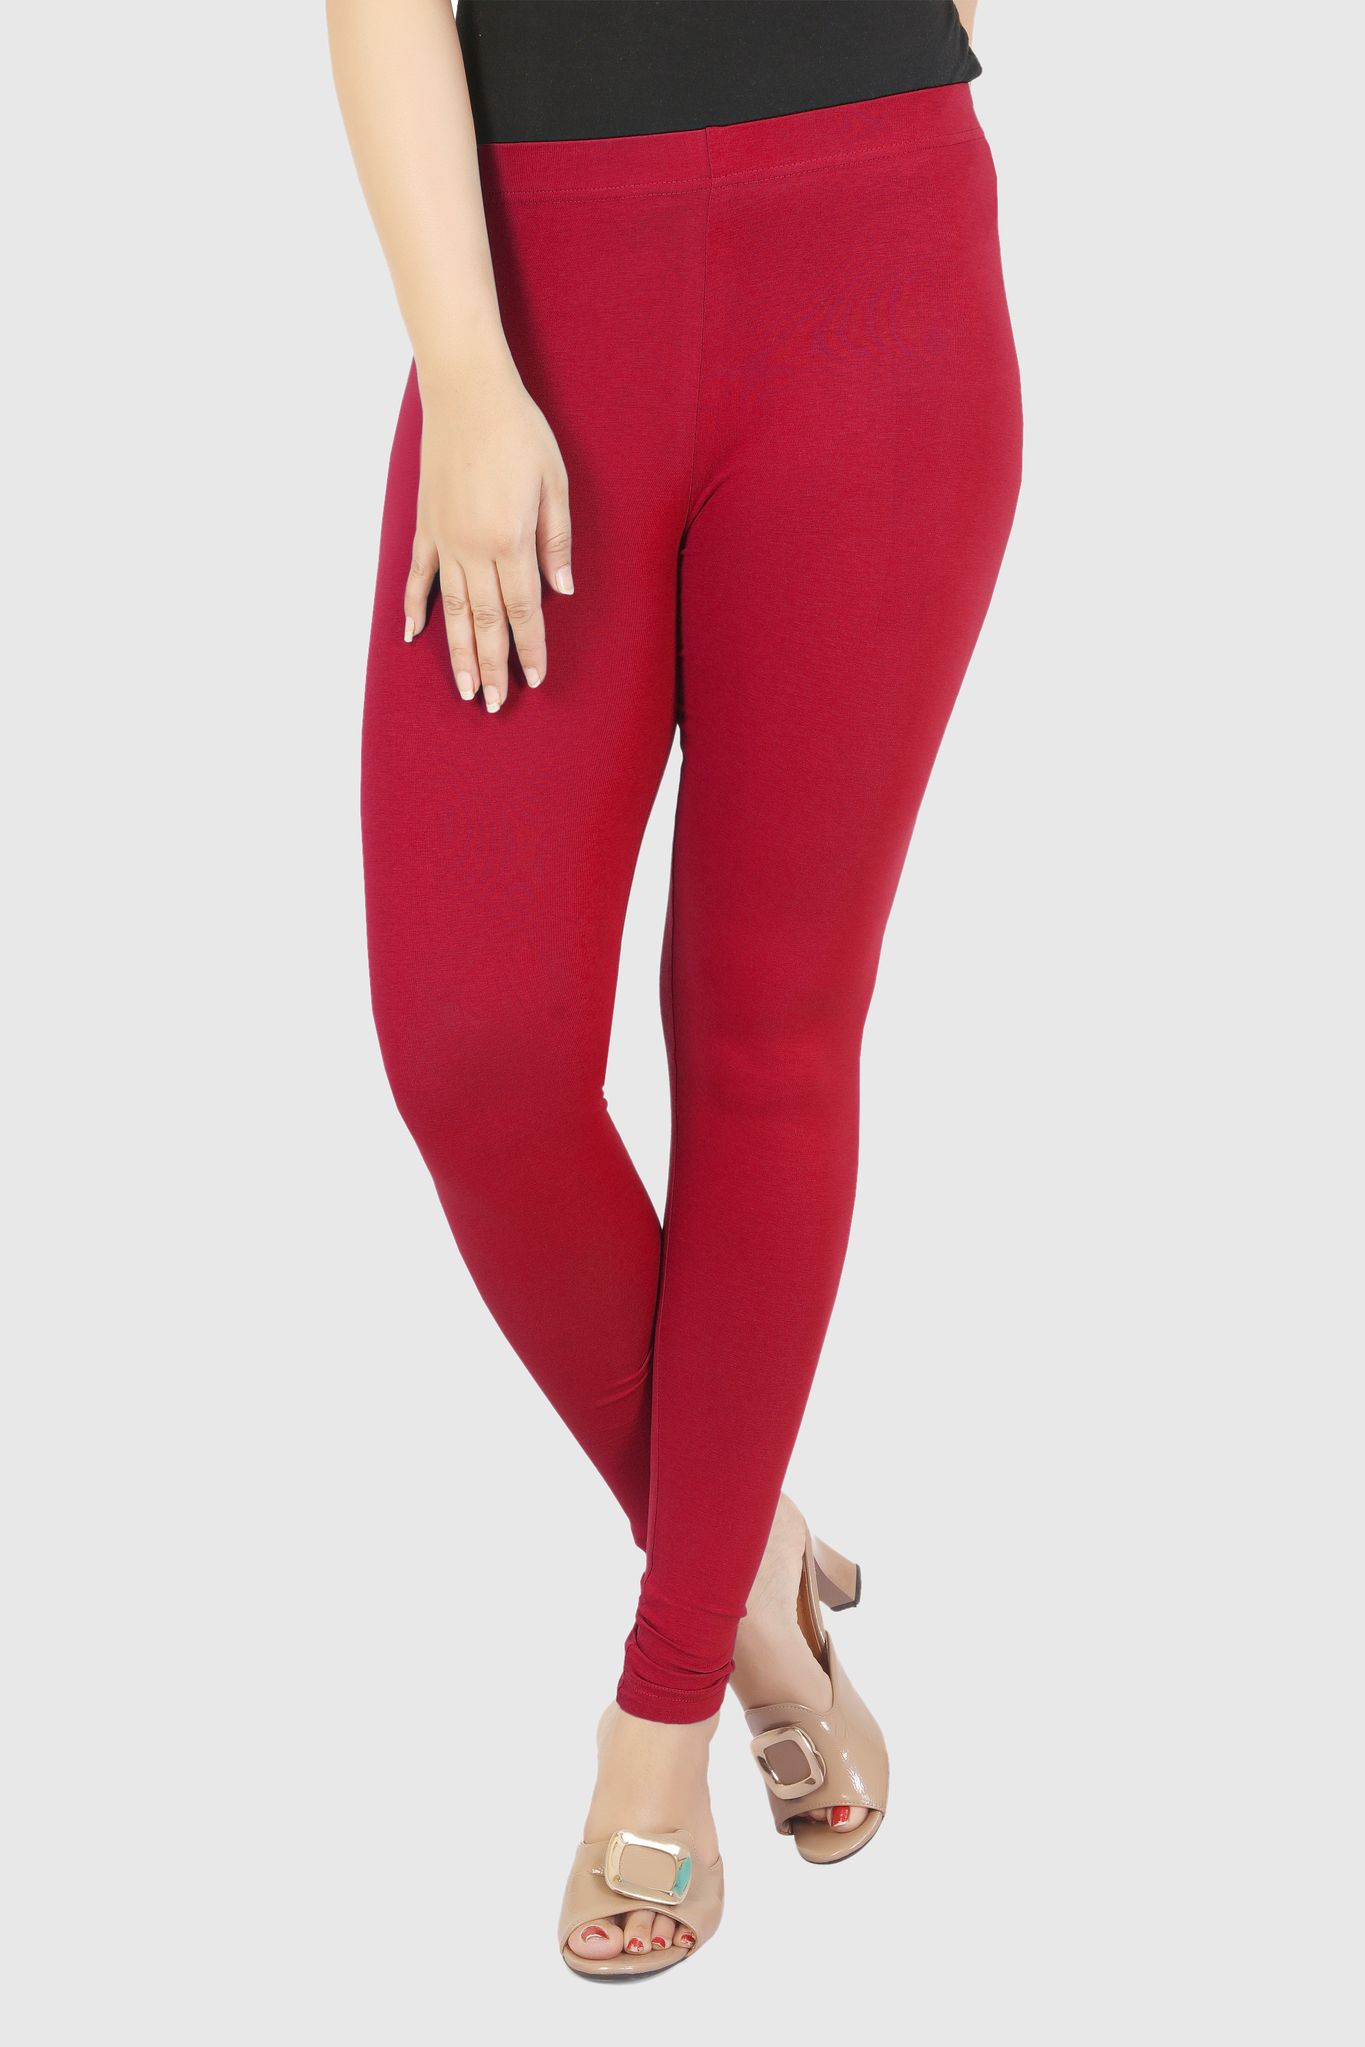 Ankle Length Leggings Clothing And Accessories